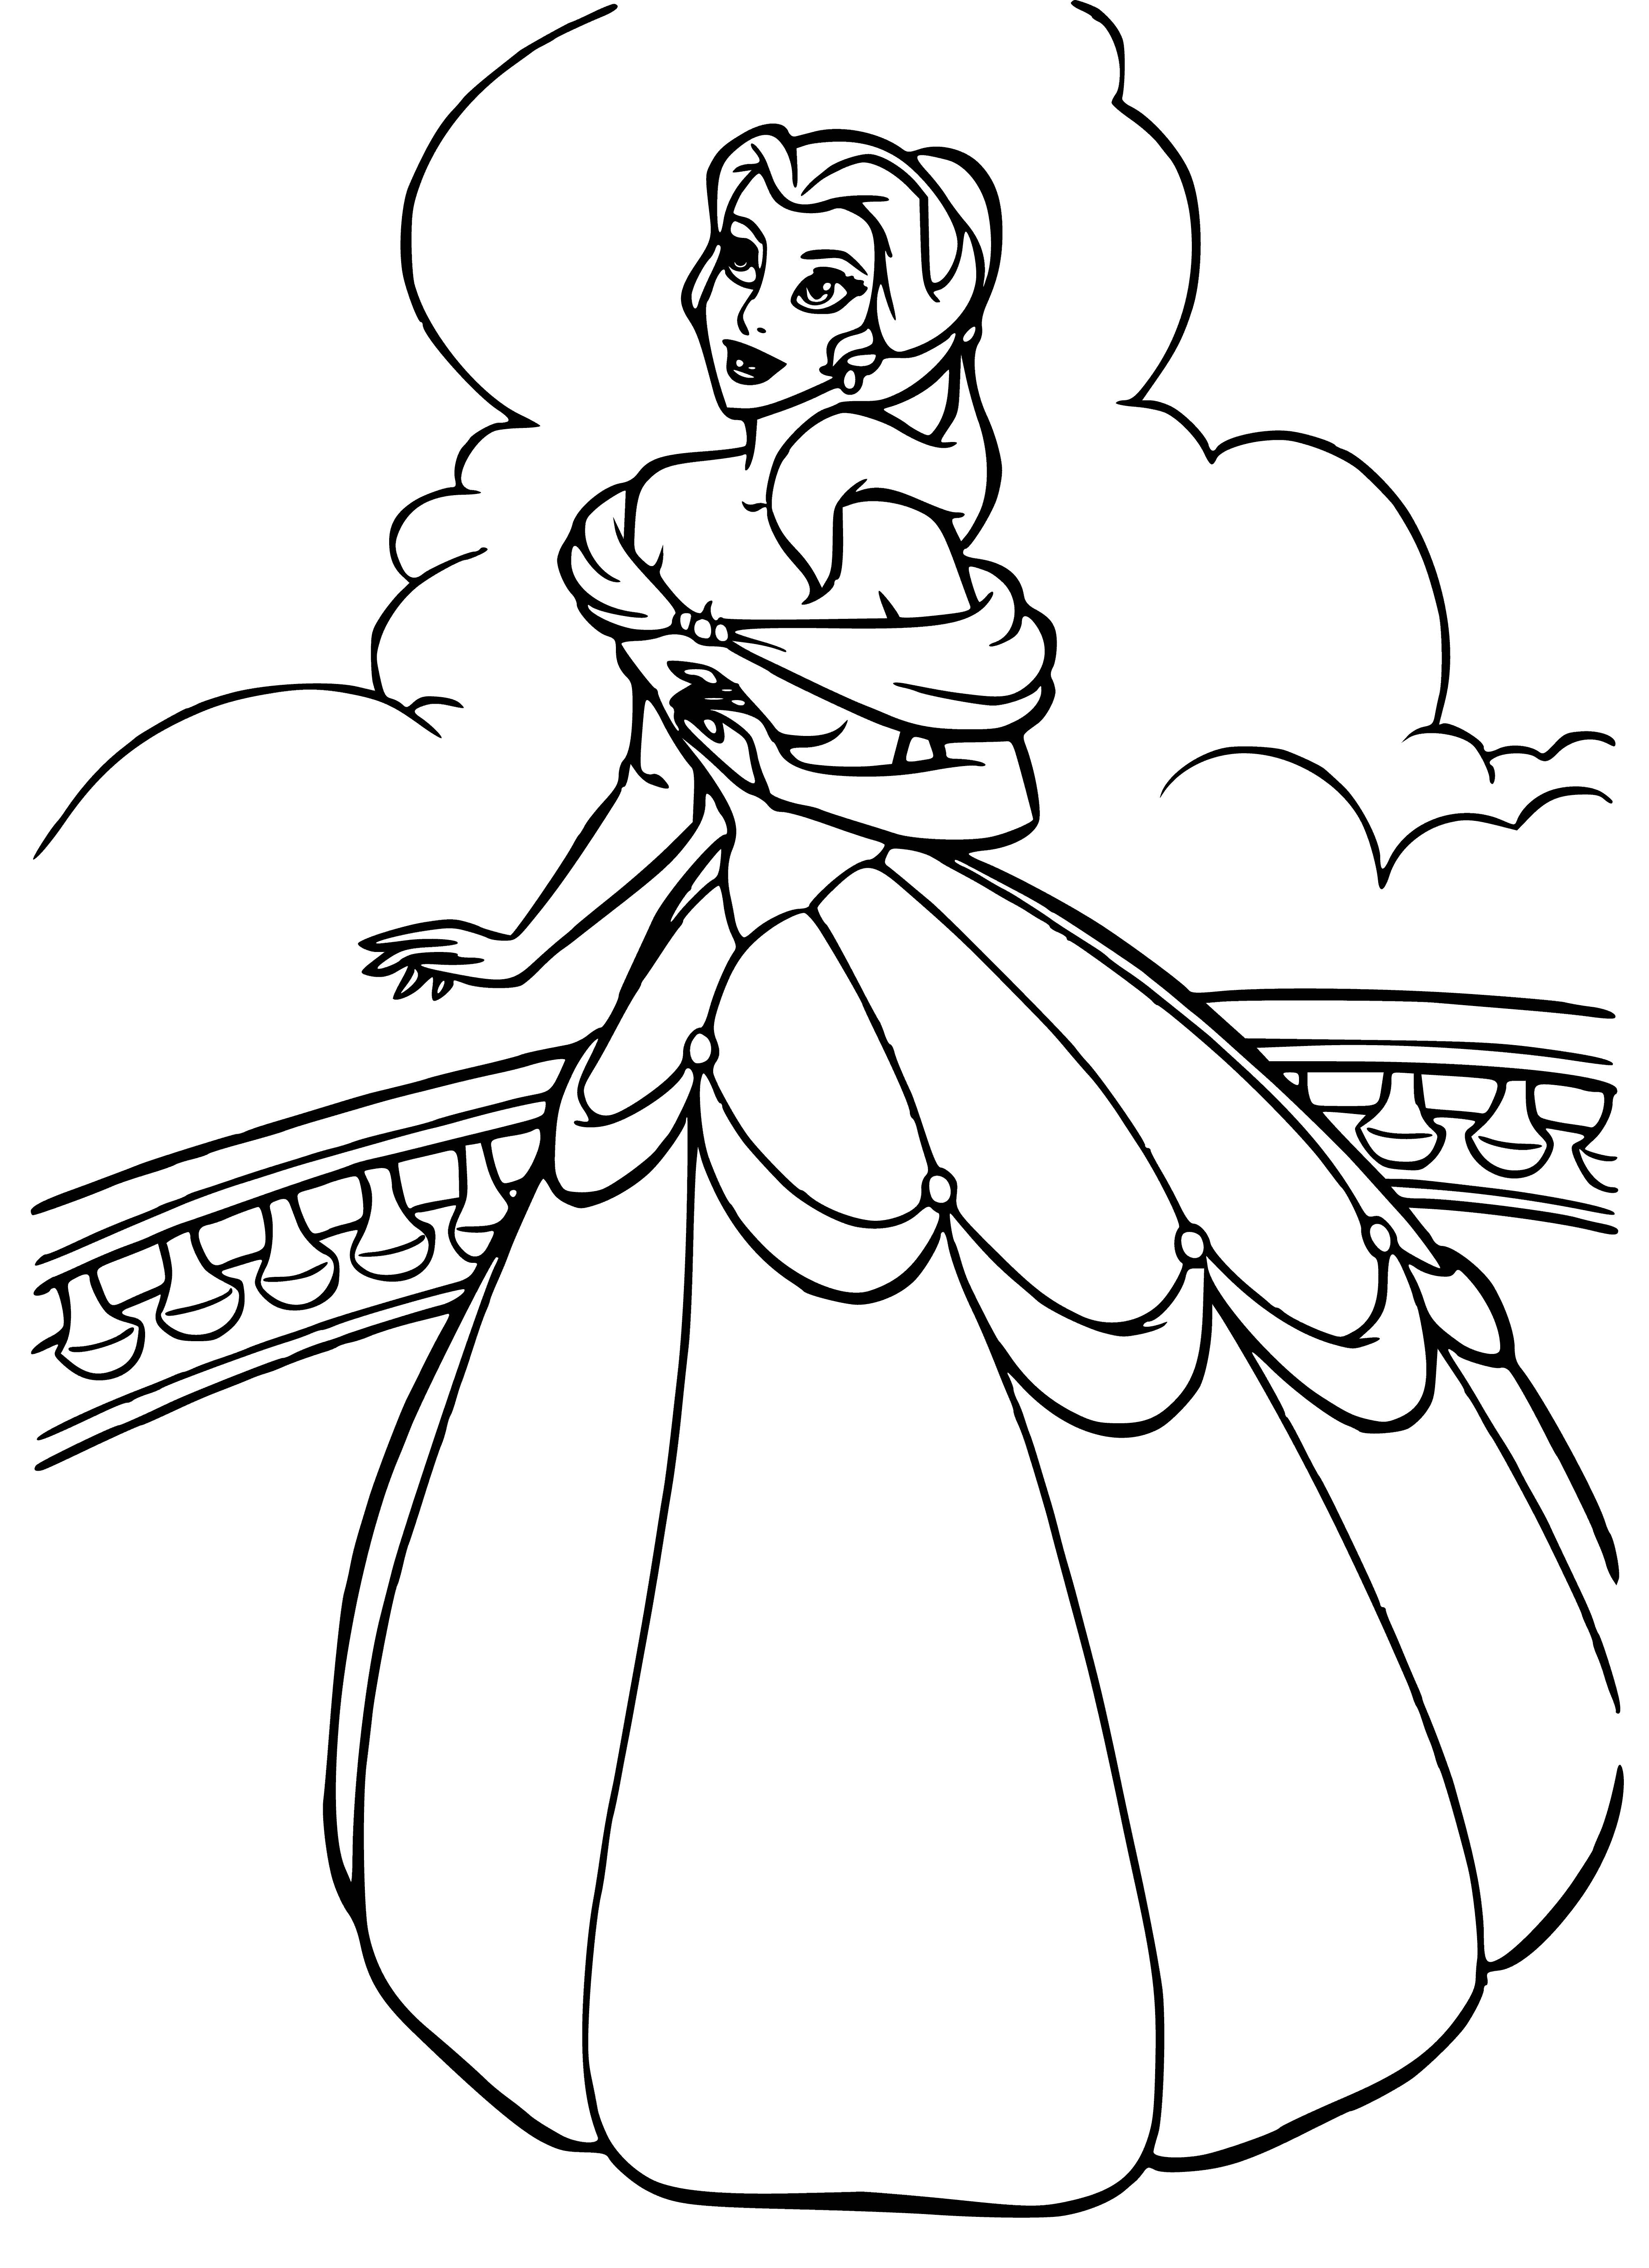 coloring page: Belle looks out at the beauty of the Beast's castle as the sun sets, holding a rose in her hand. #BeautyAndTheBeast